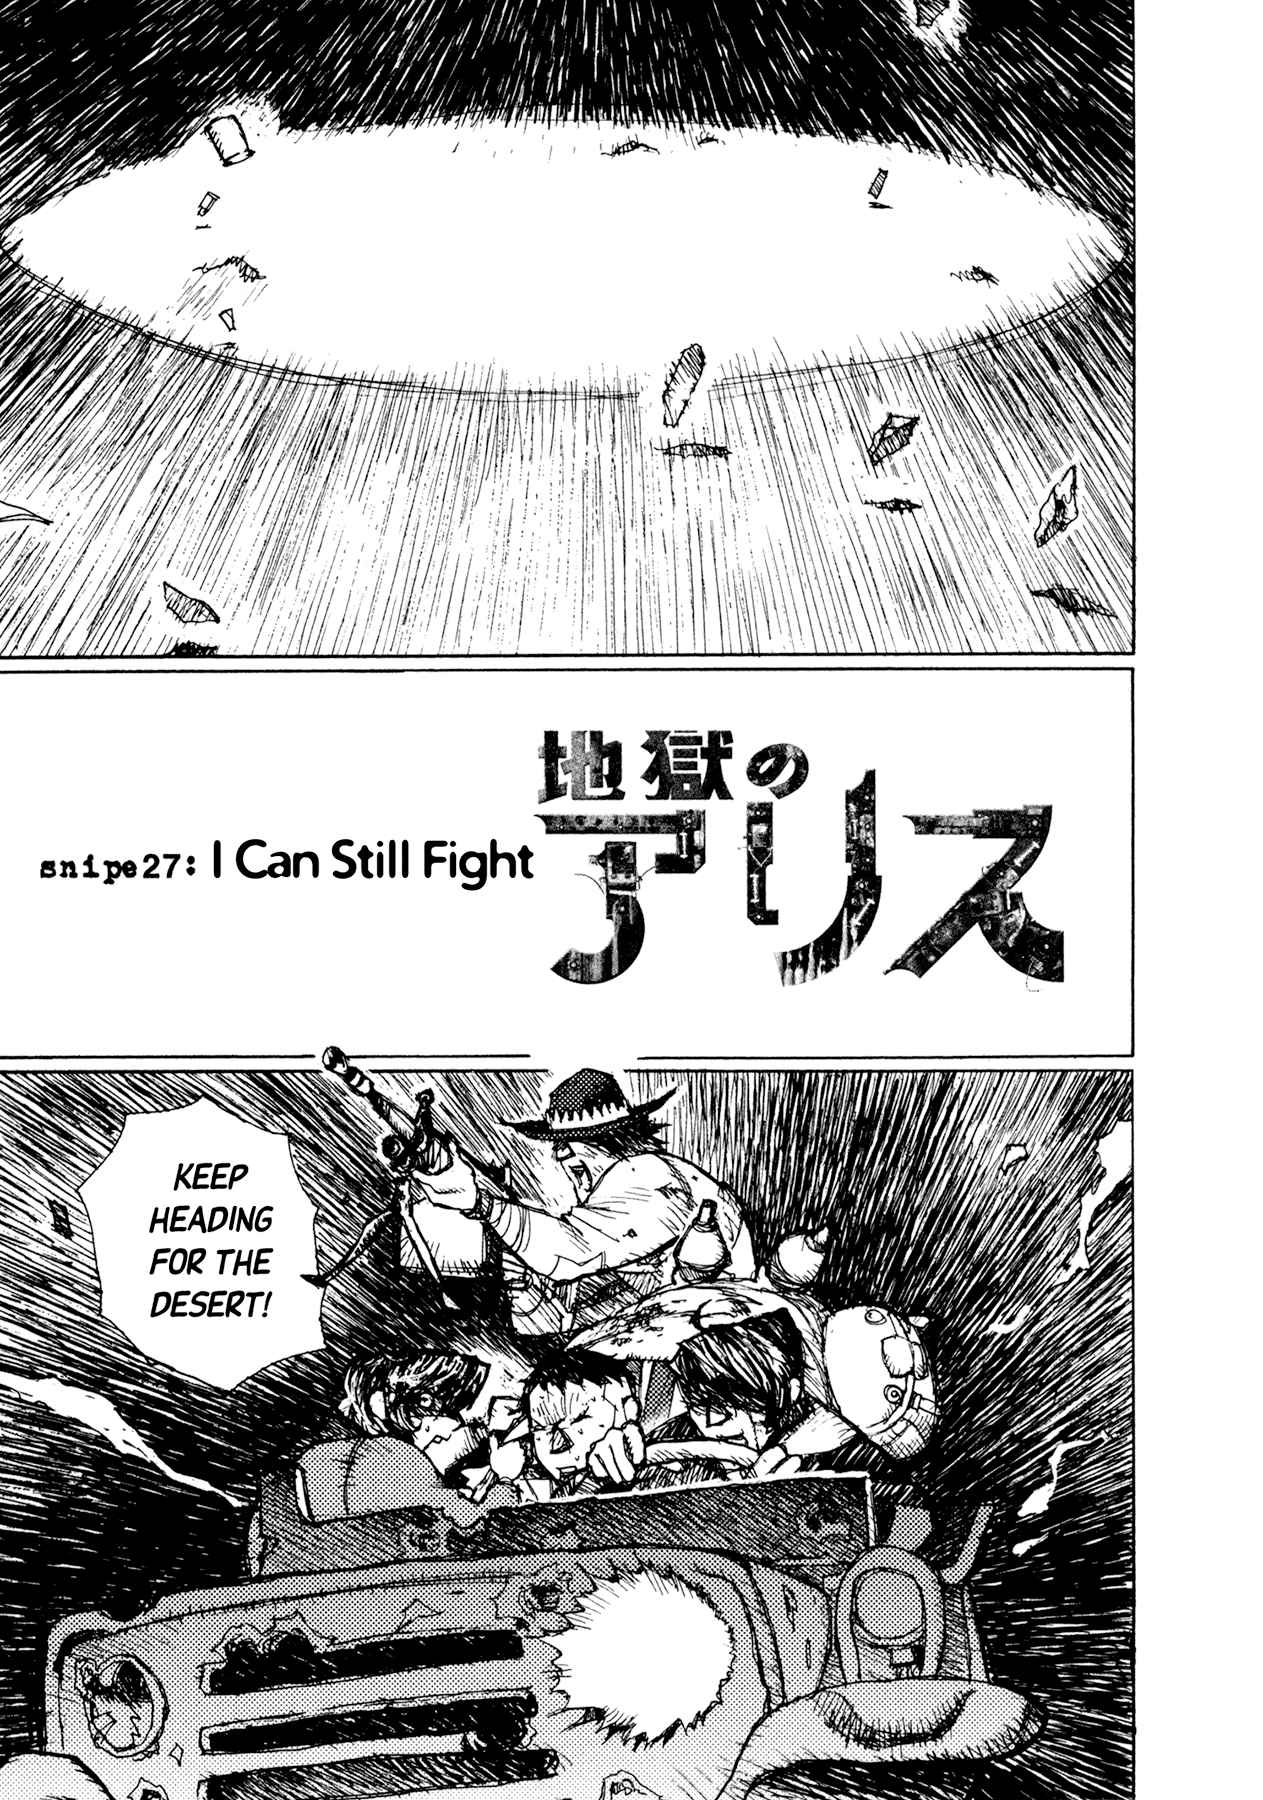 Alice in Hell Vol. 4 Ch. 27 I Can Still Fight